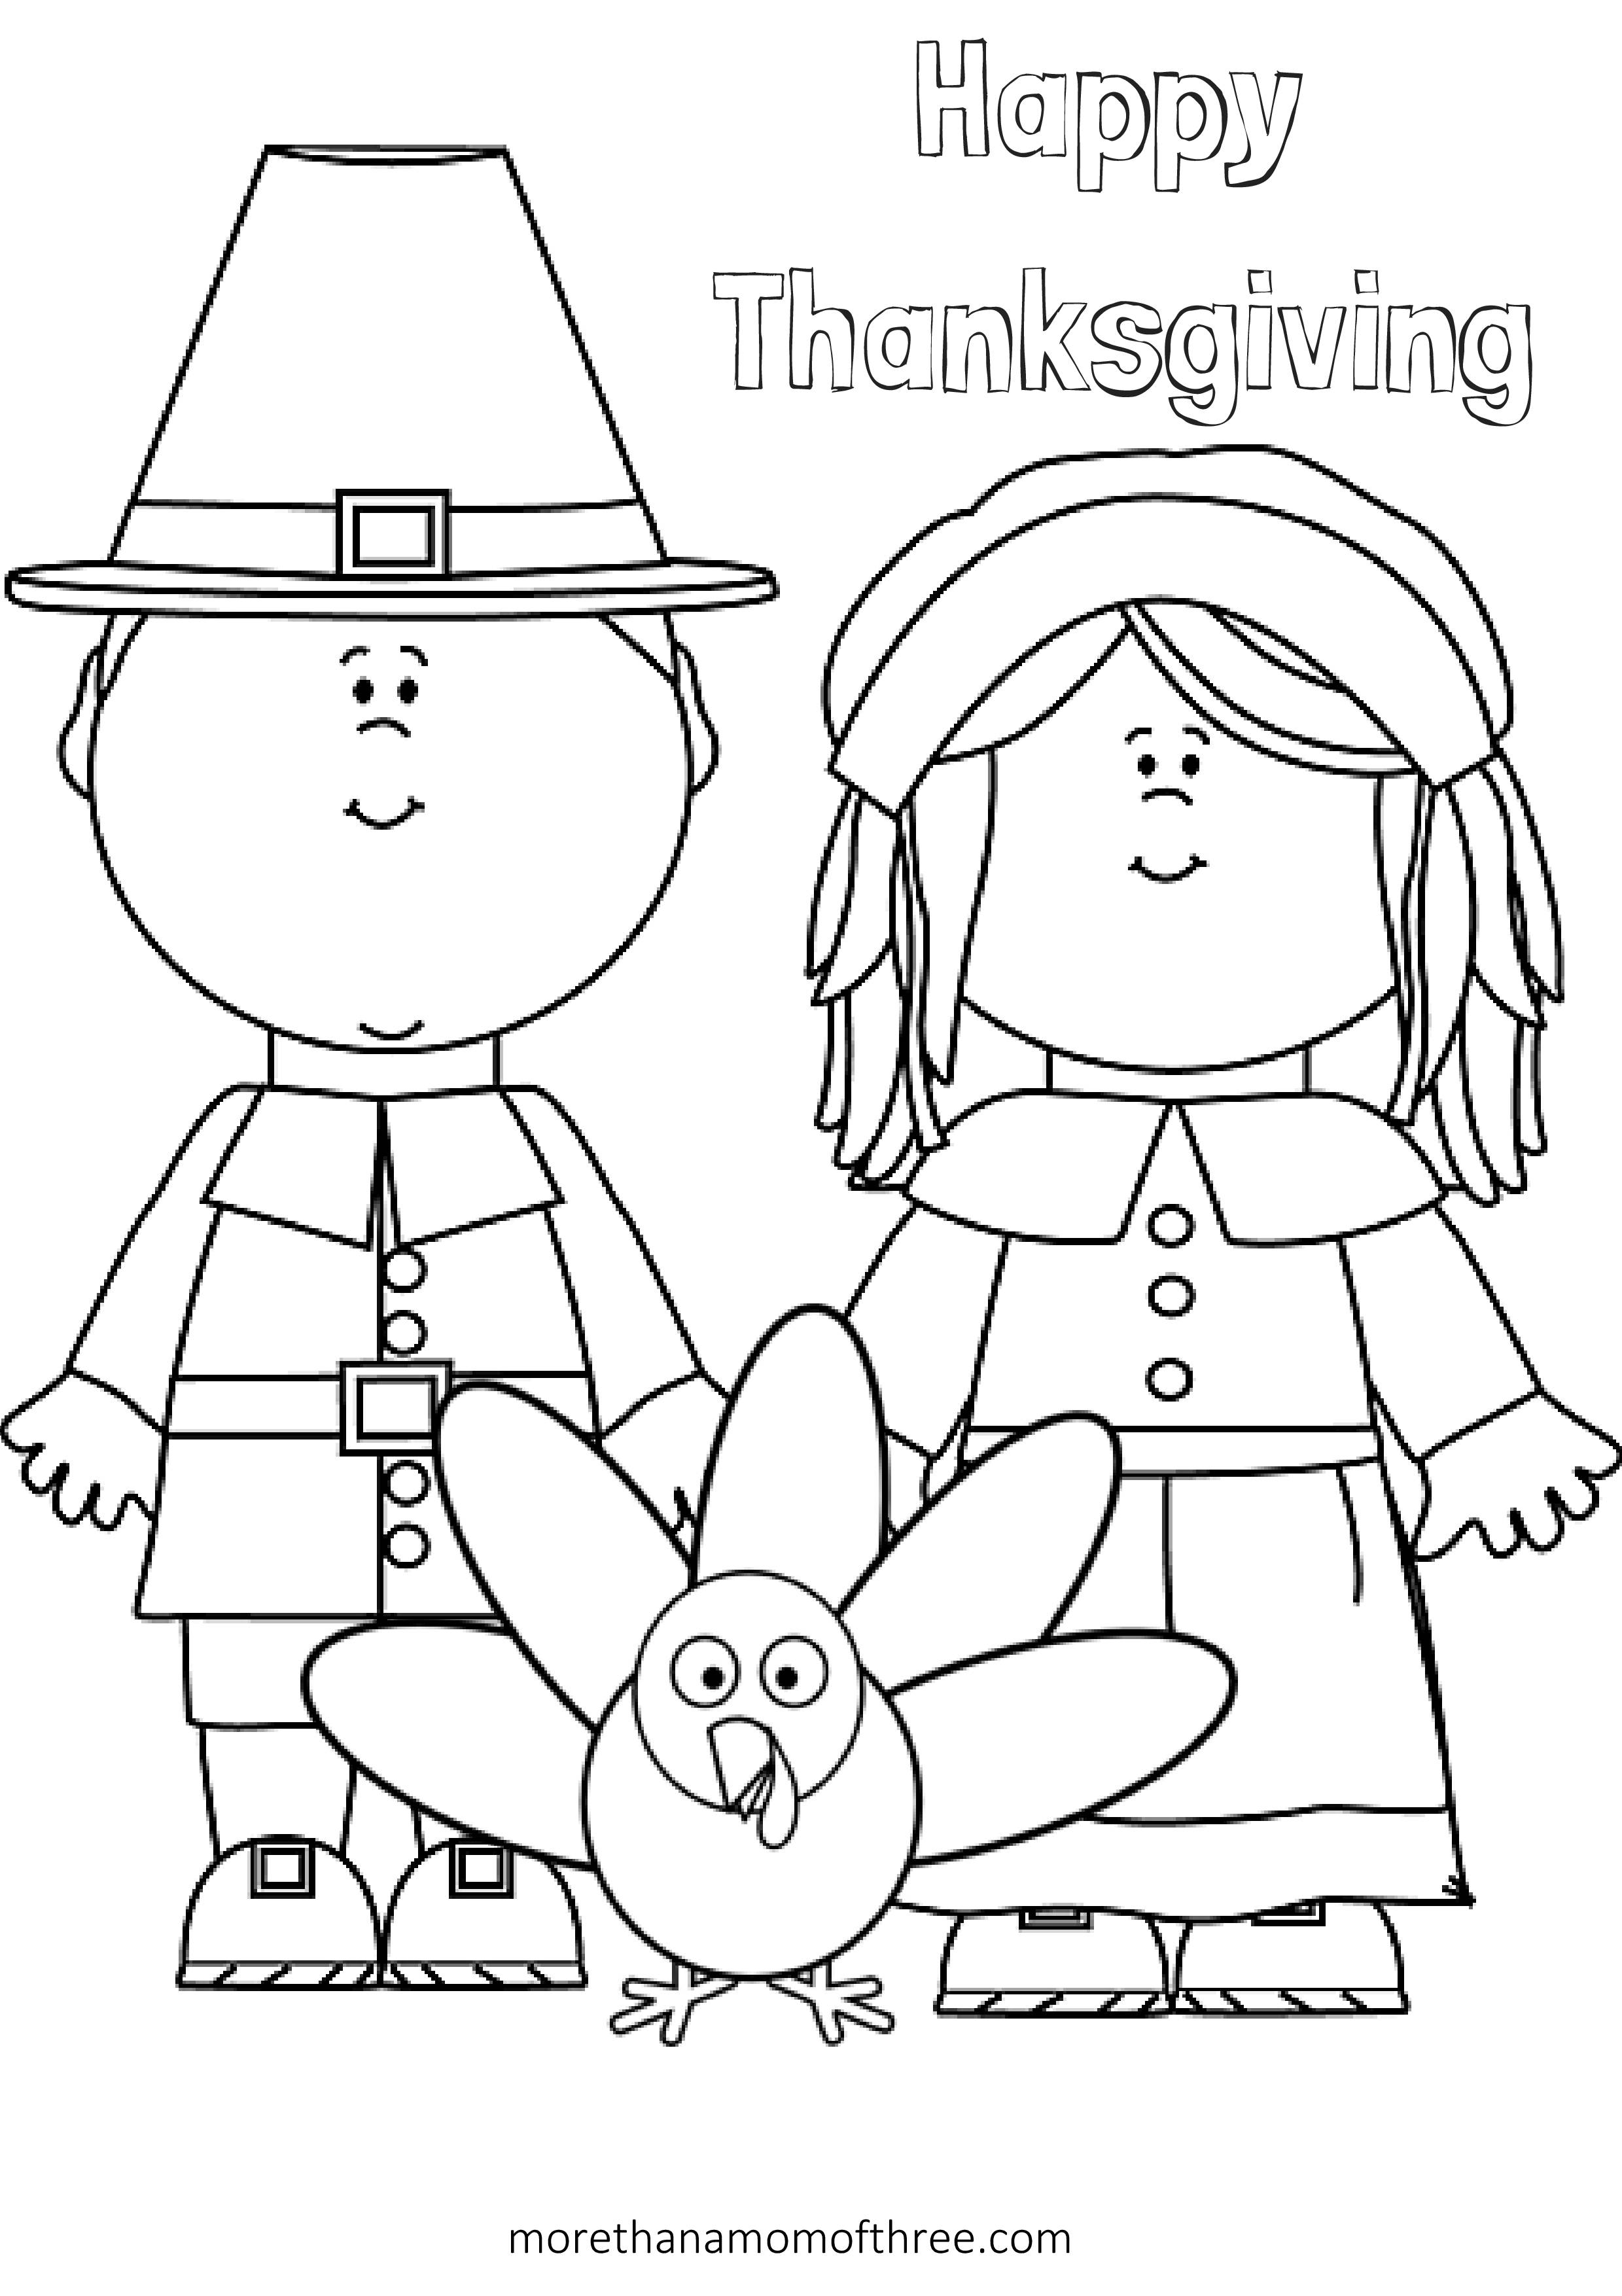 Thanksgiving Coloring Pages To Print For Free Coloring Home